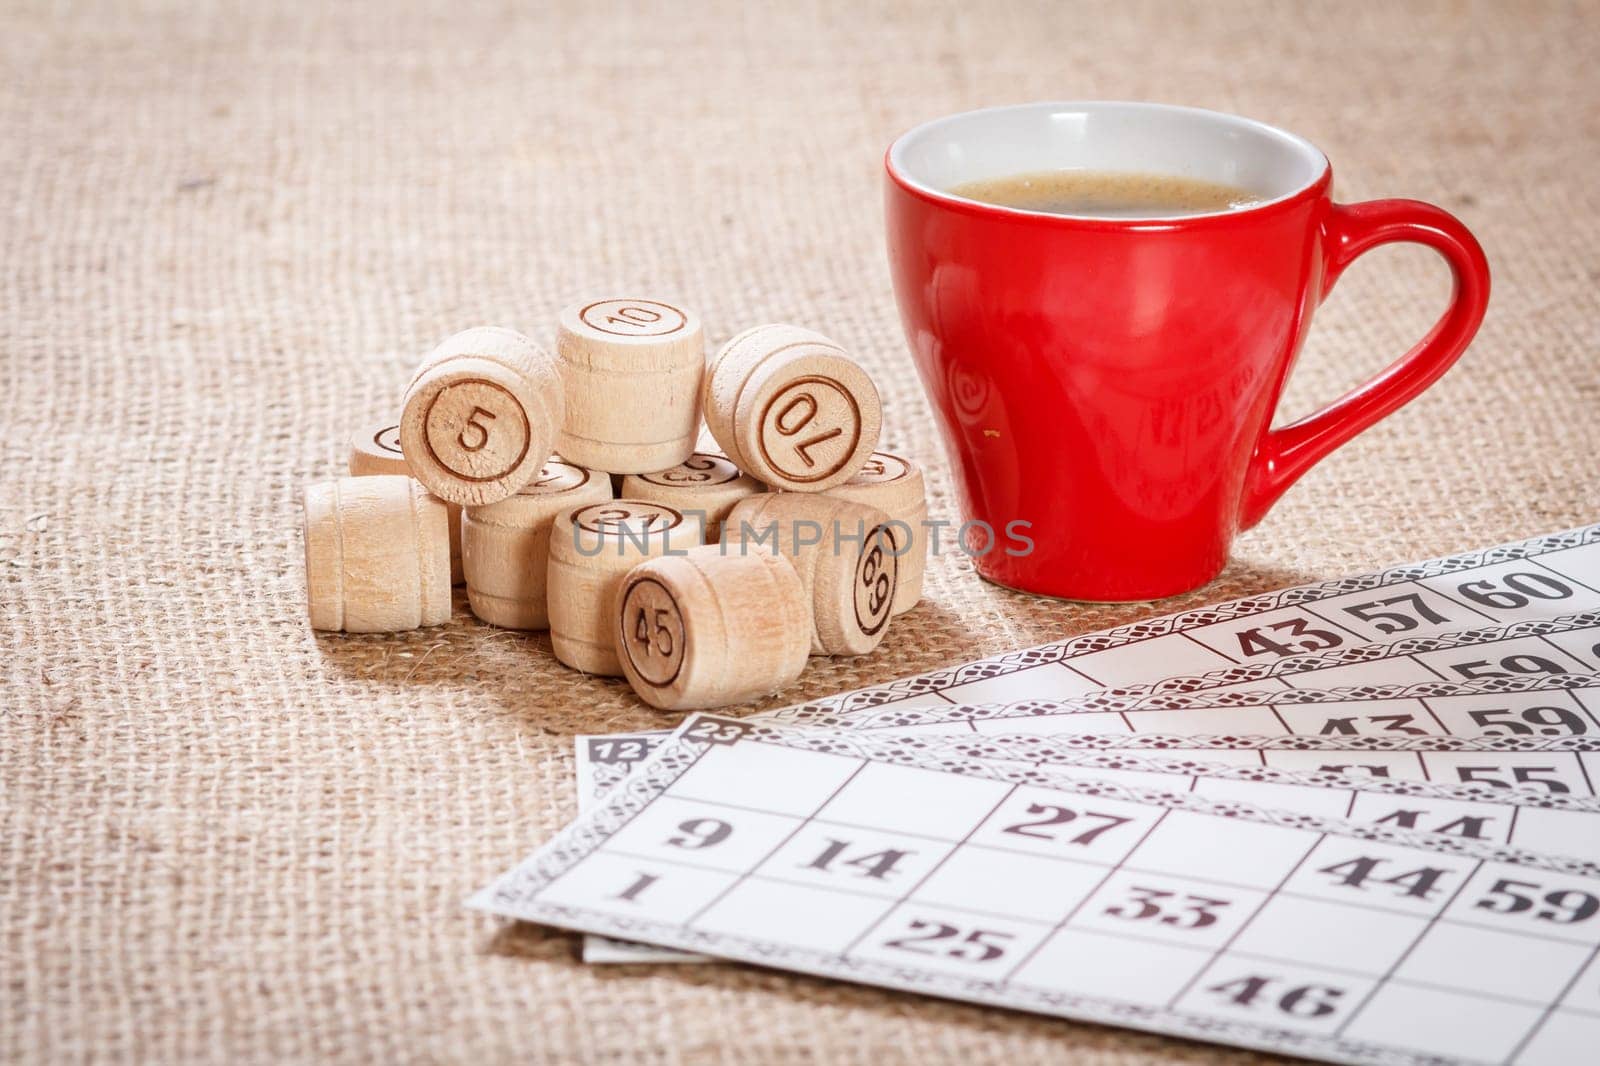 Board game lotto on sackcloth. Wooden lotto barrels and game cards with cup of coffee. by mvg6894